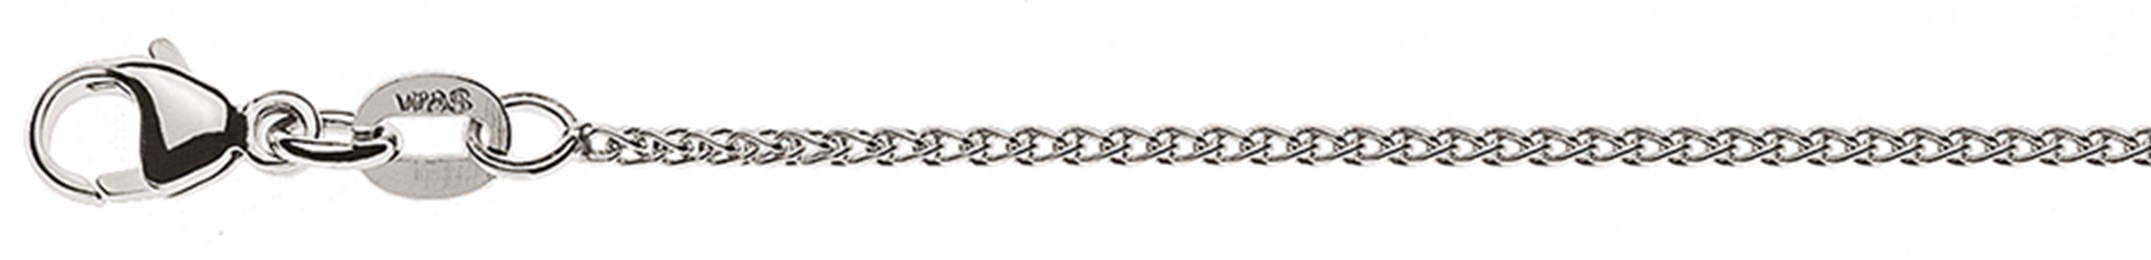 AURONOS Style Necklace white gold 9K cable chain 45cm 1.2mm